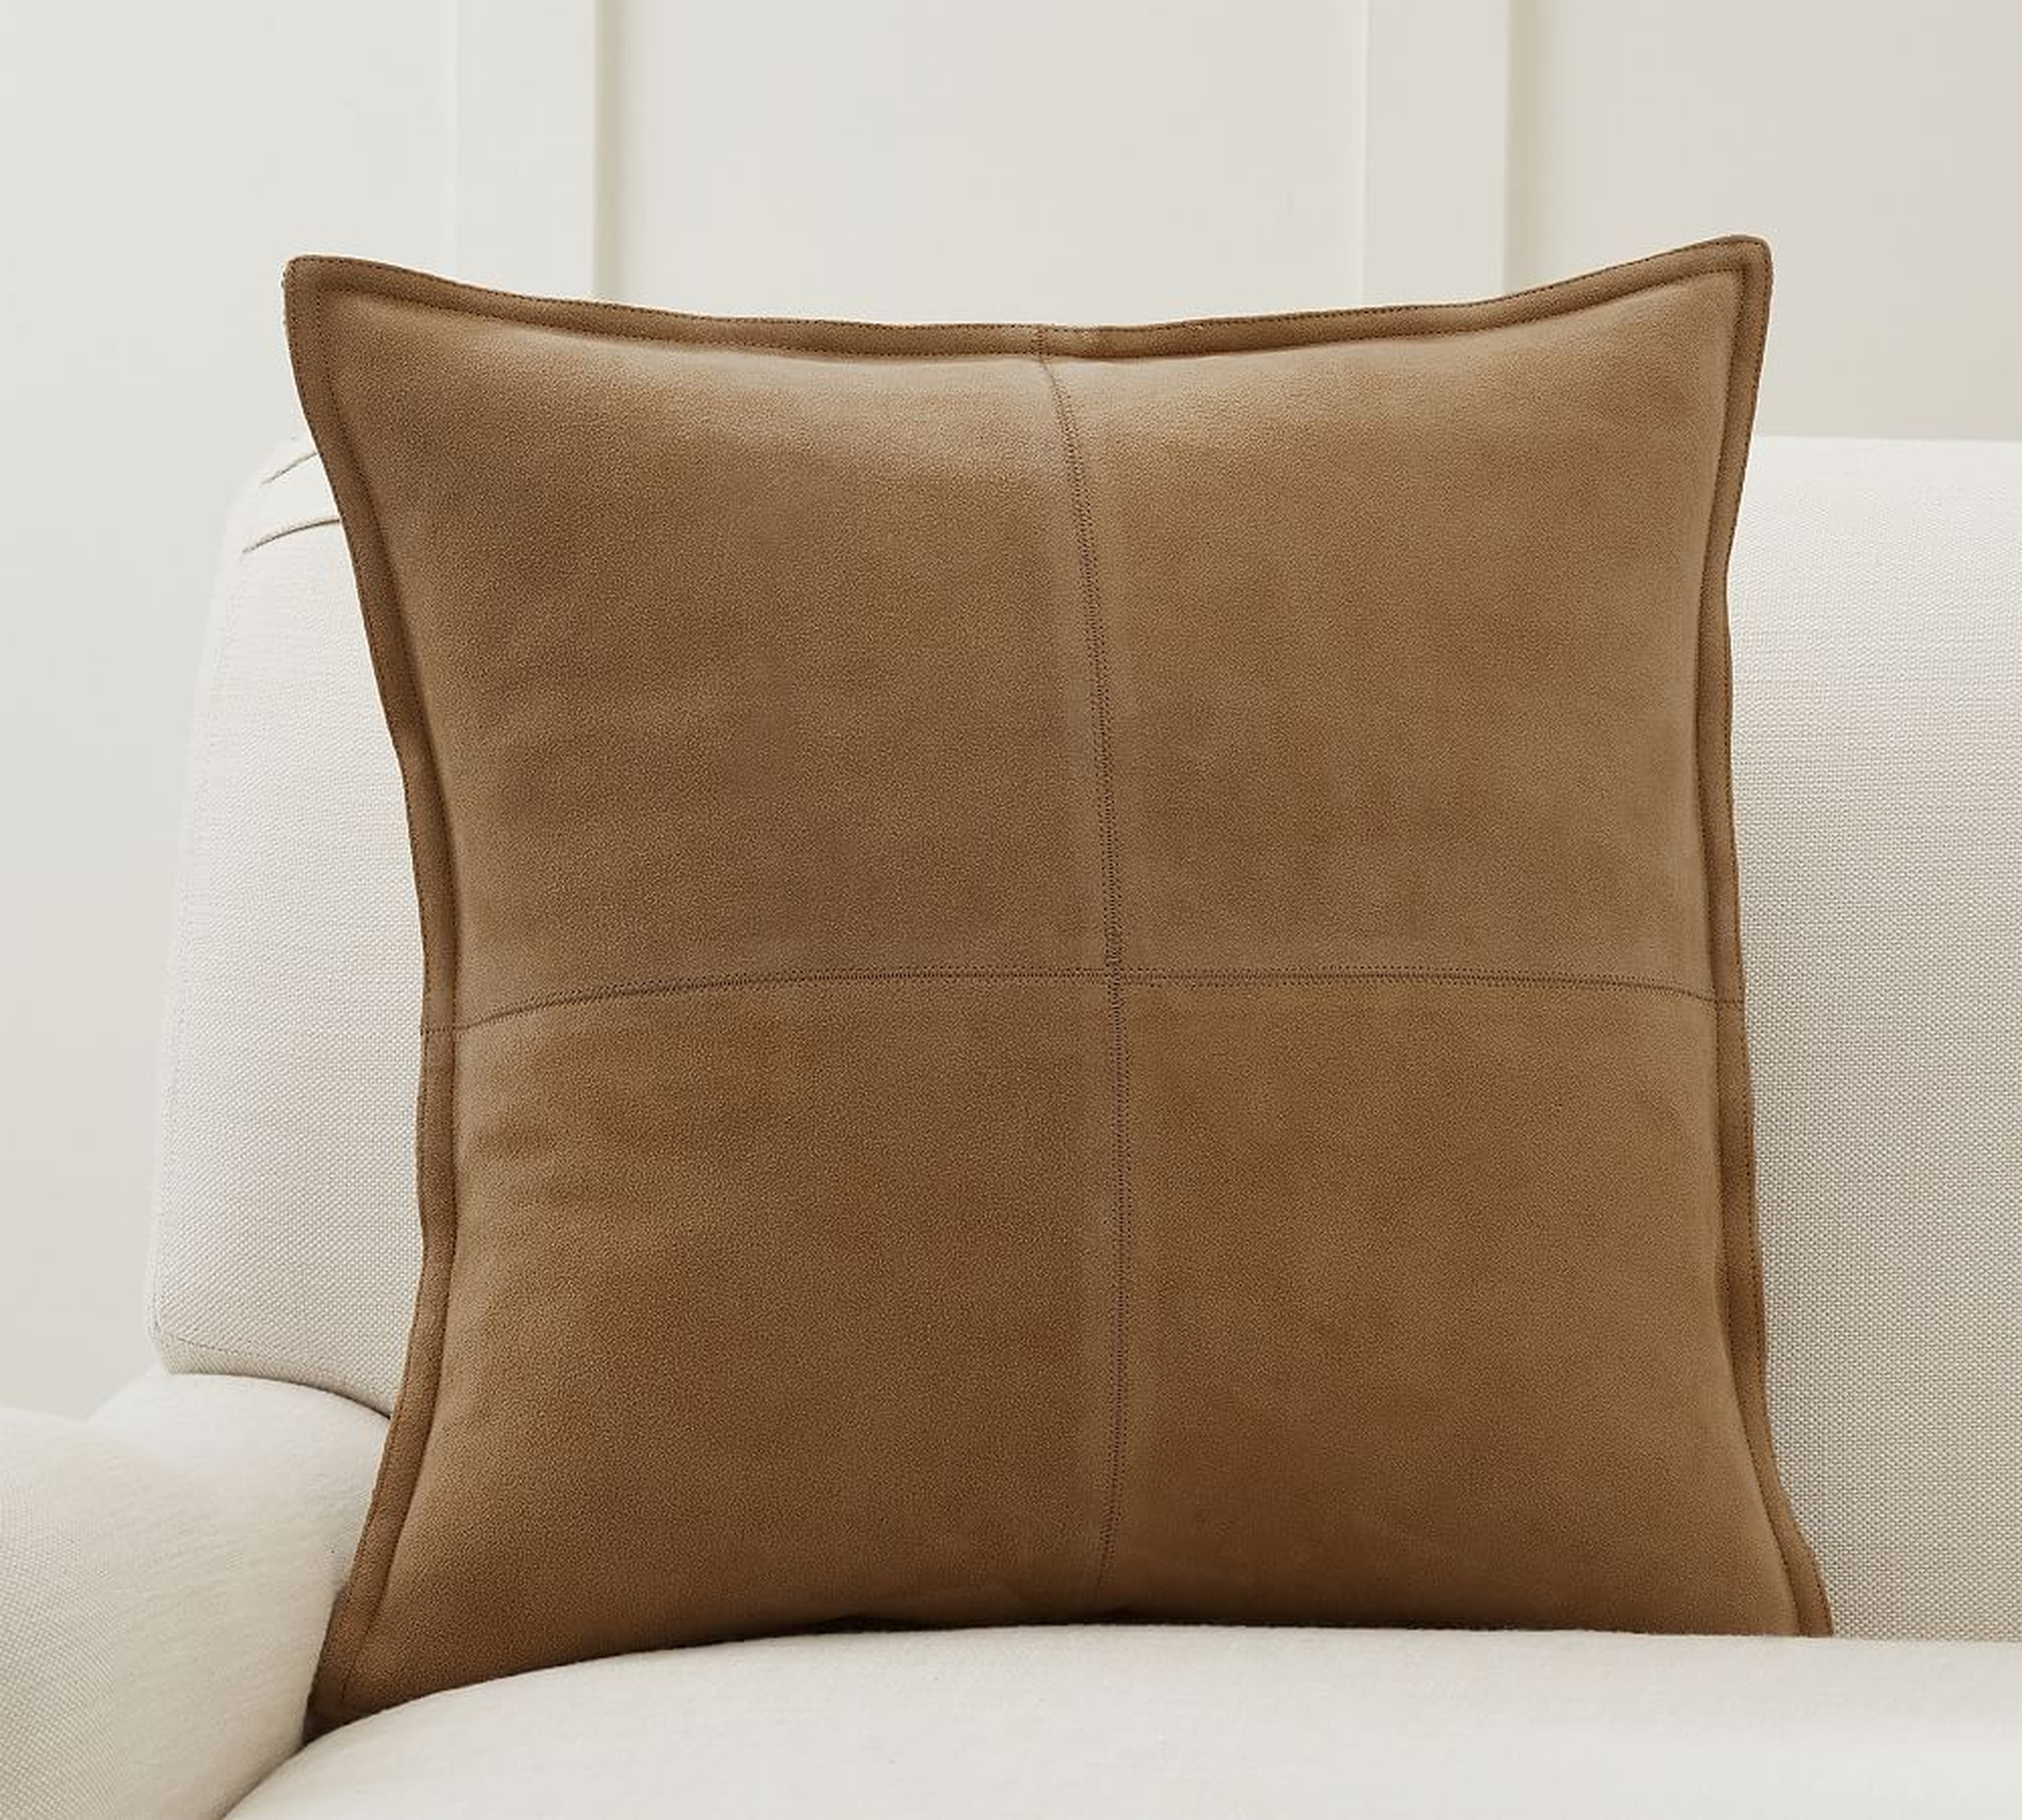 Pieced Suede Pillow Cover - Set of 2, 20 x 20", Camel - Pottery Barn